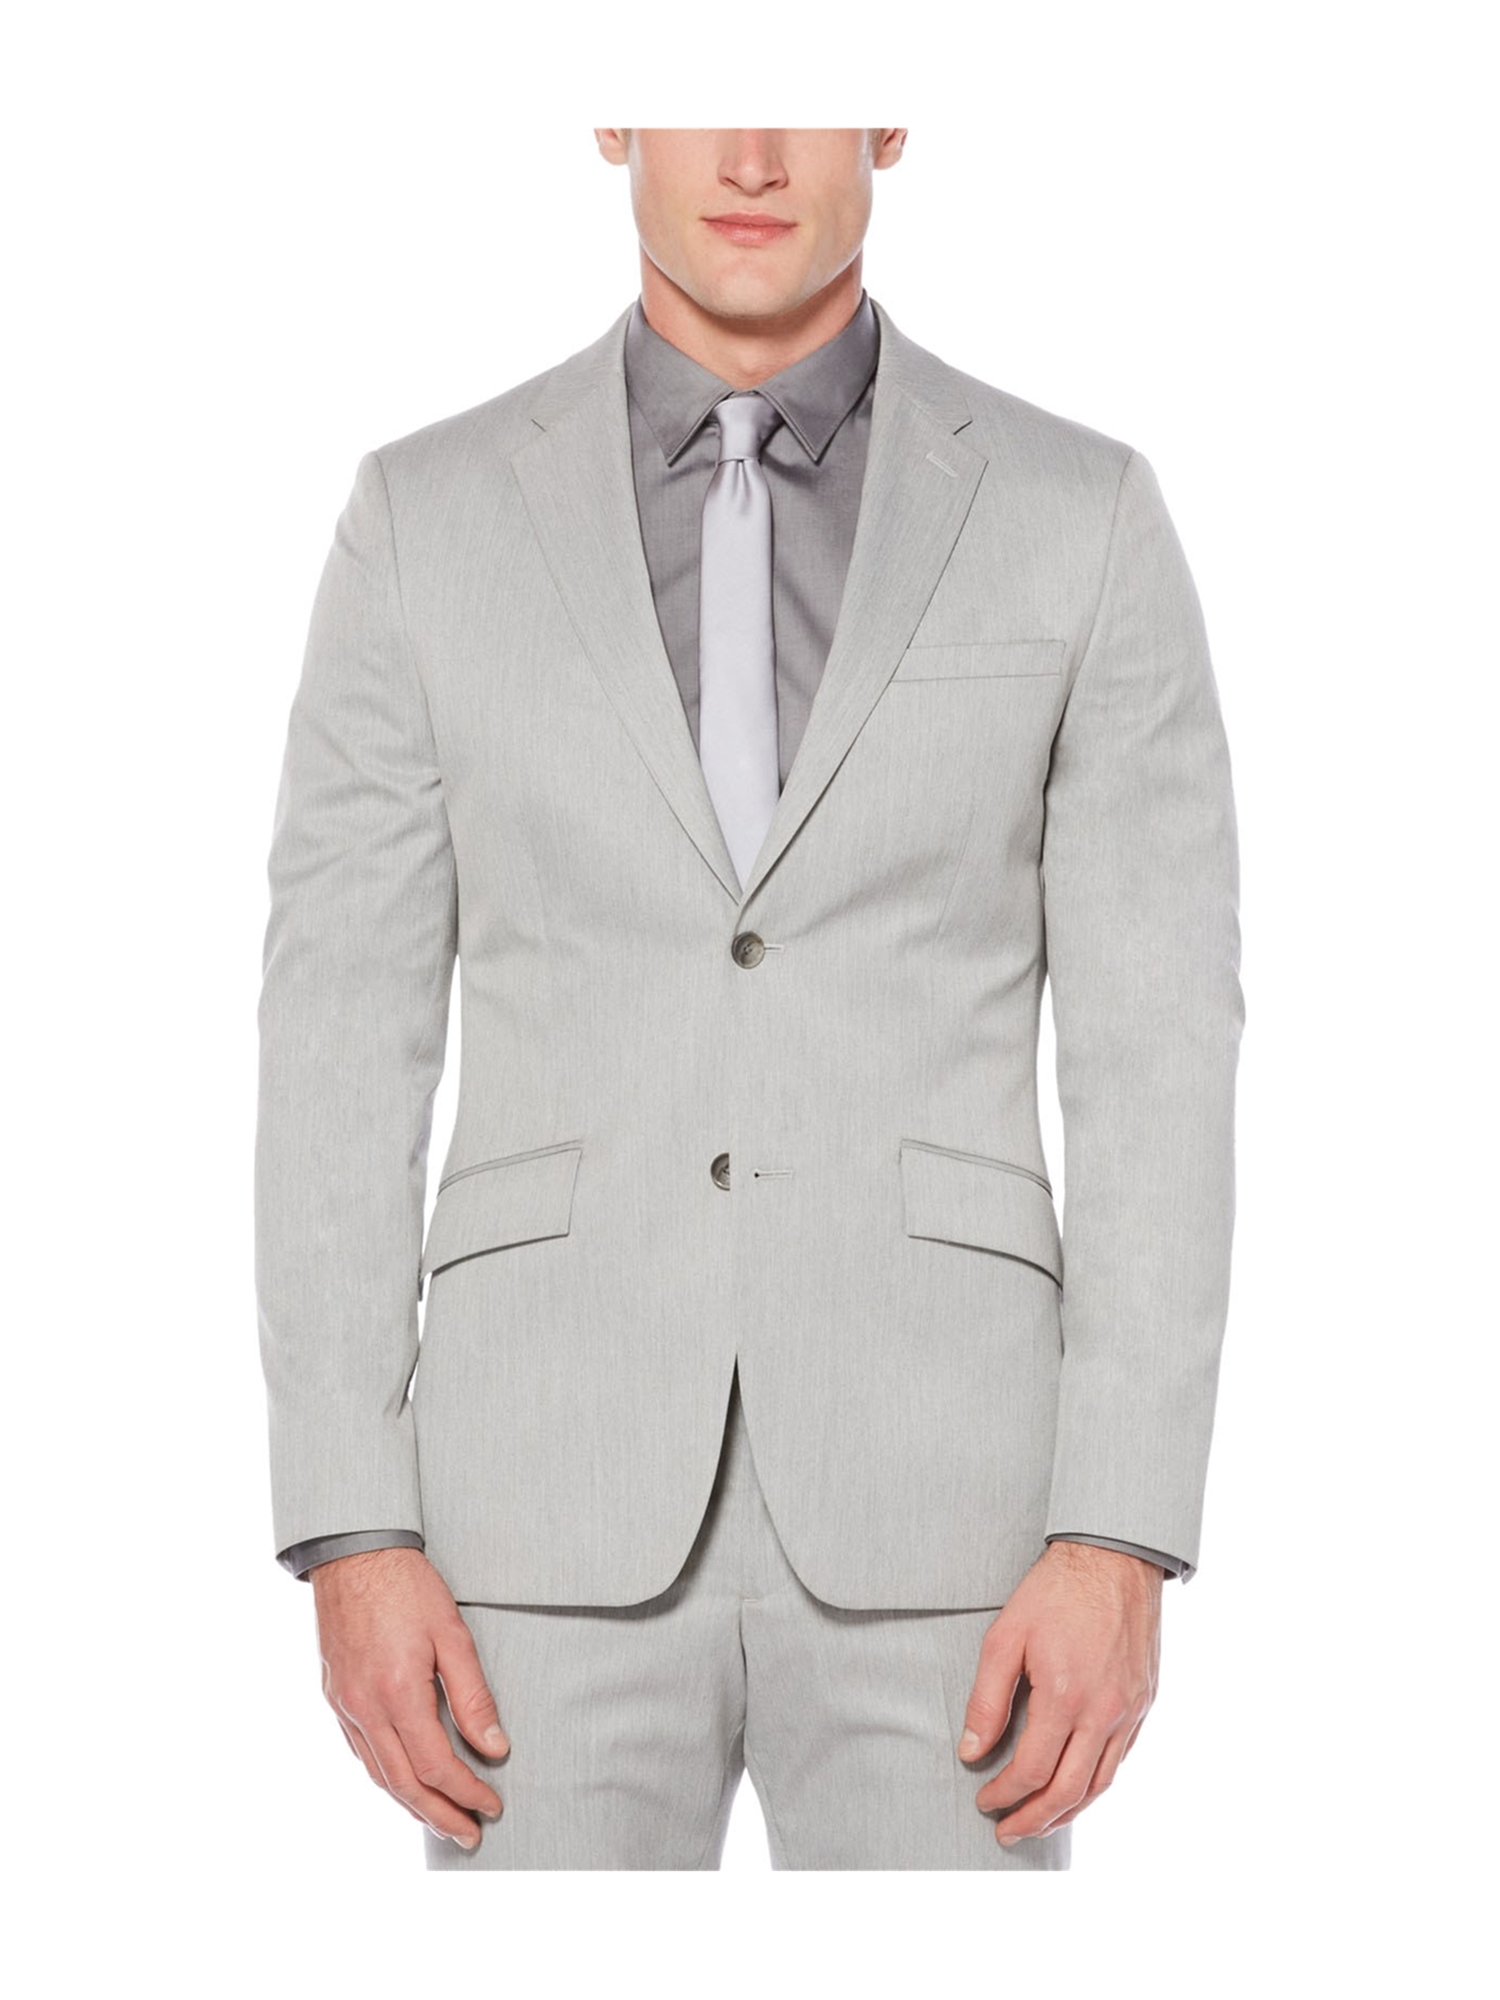 Perry Ellis Mens Heathered Two Button Blazer Jacket - image 1 of 6